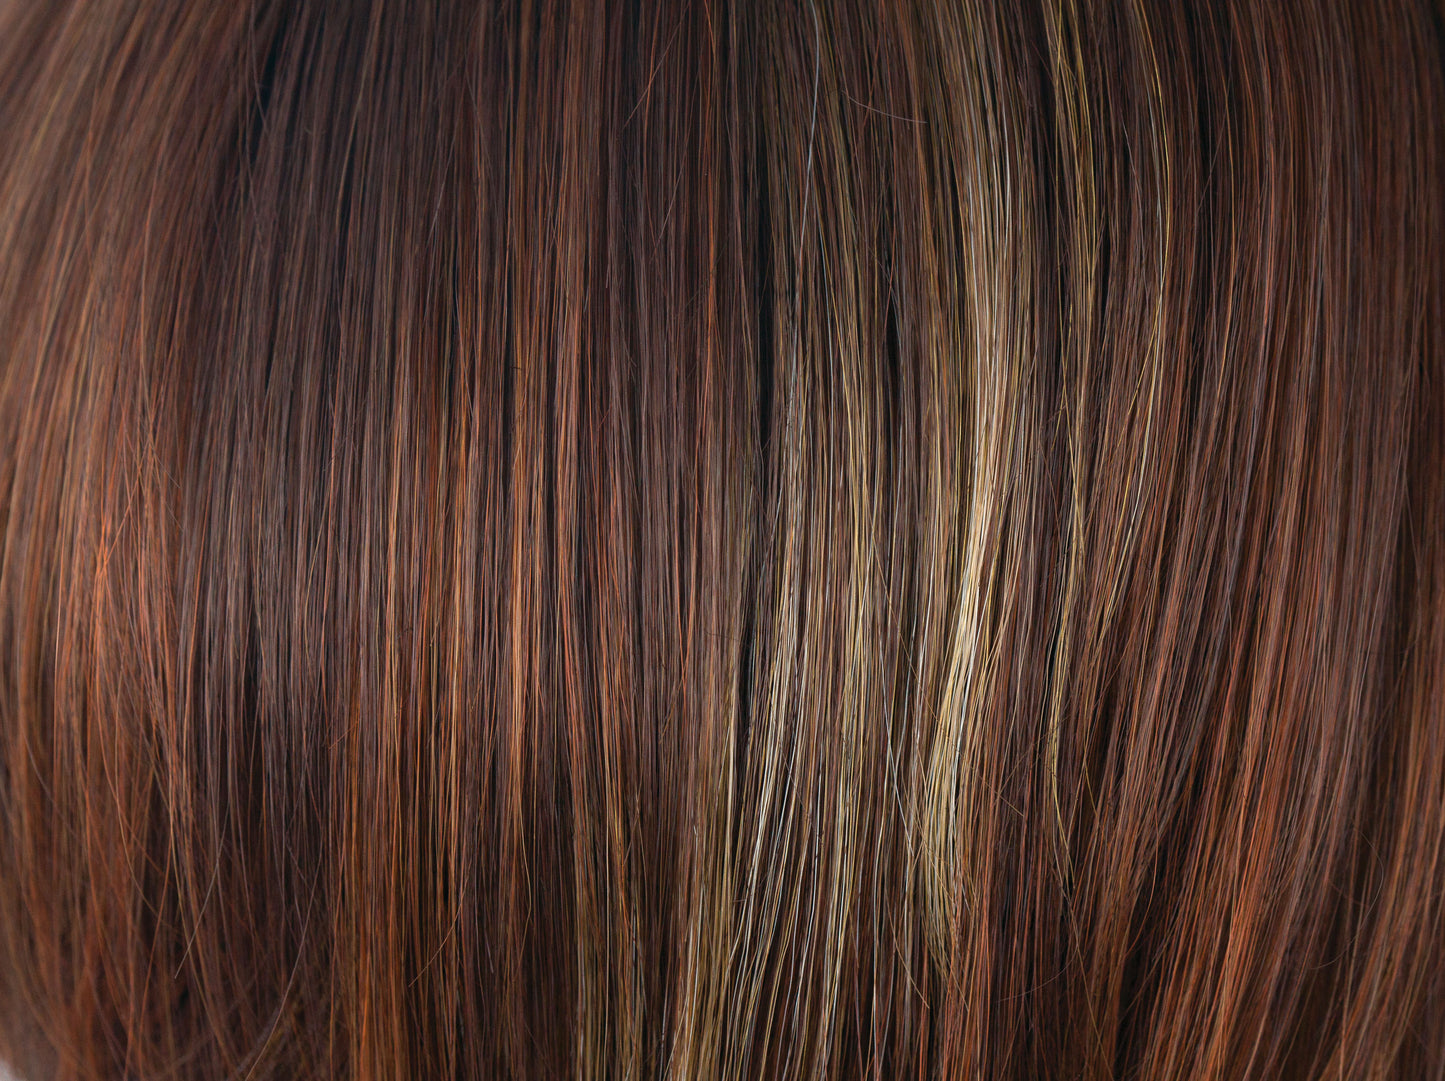 Taylor Partial Monofilament     (Style 1056)